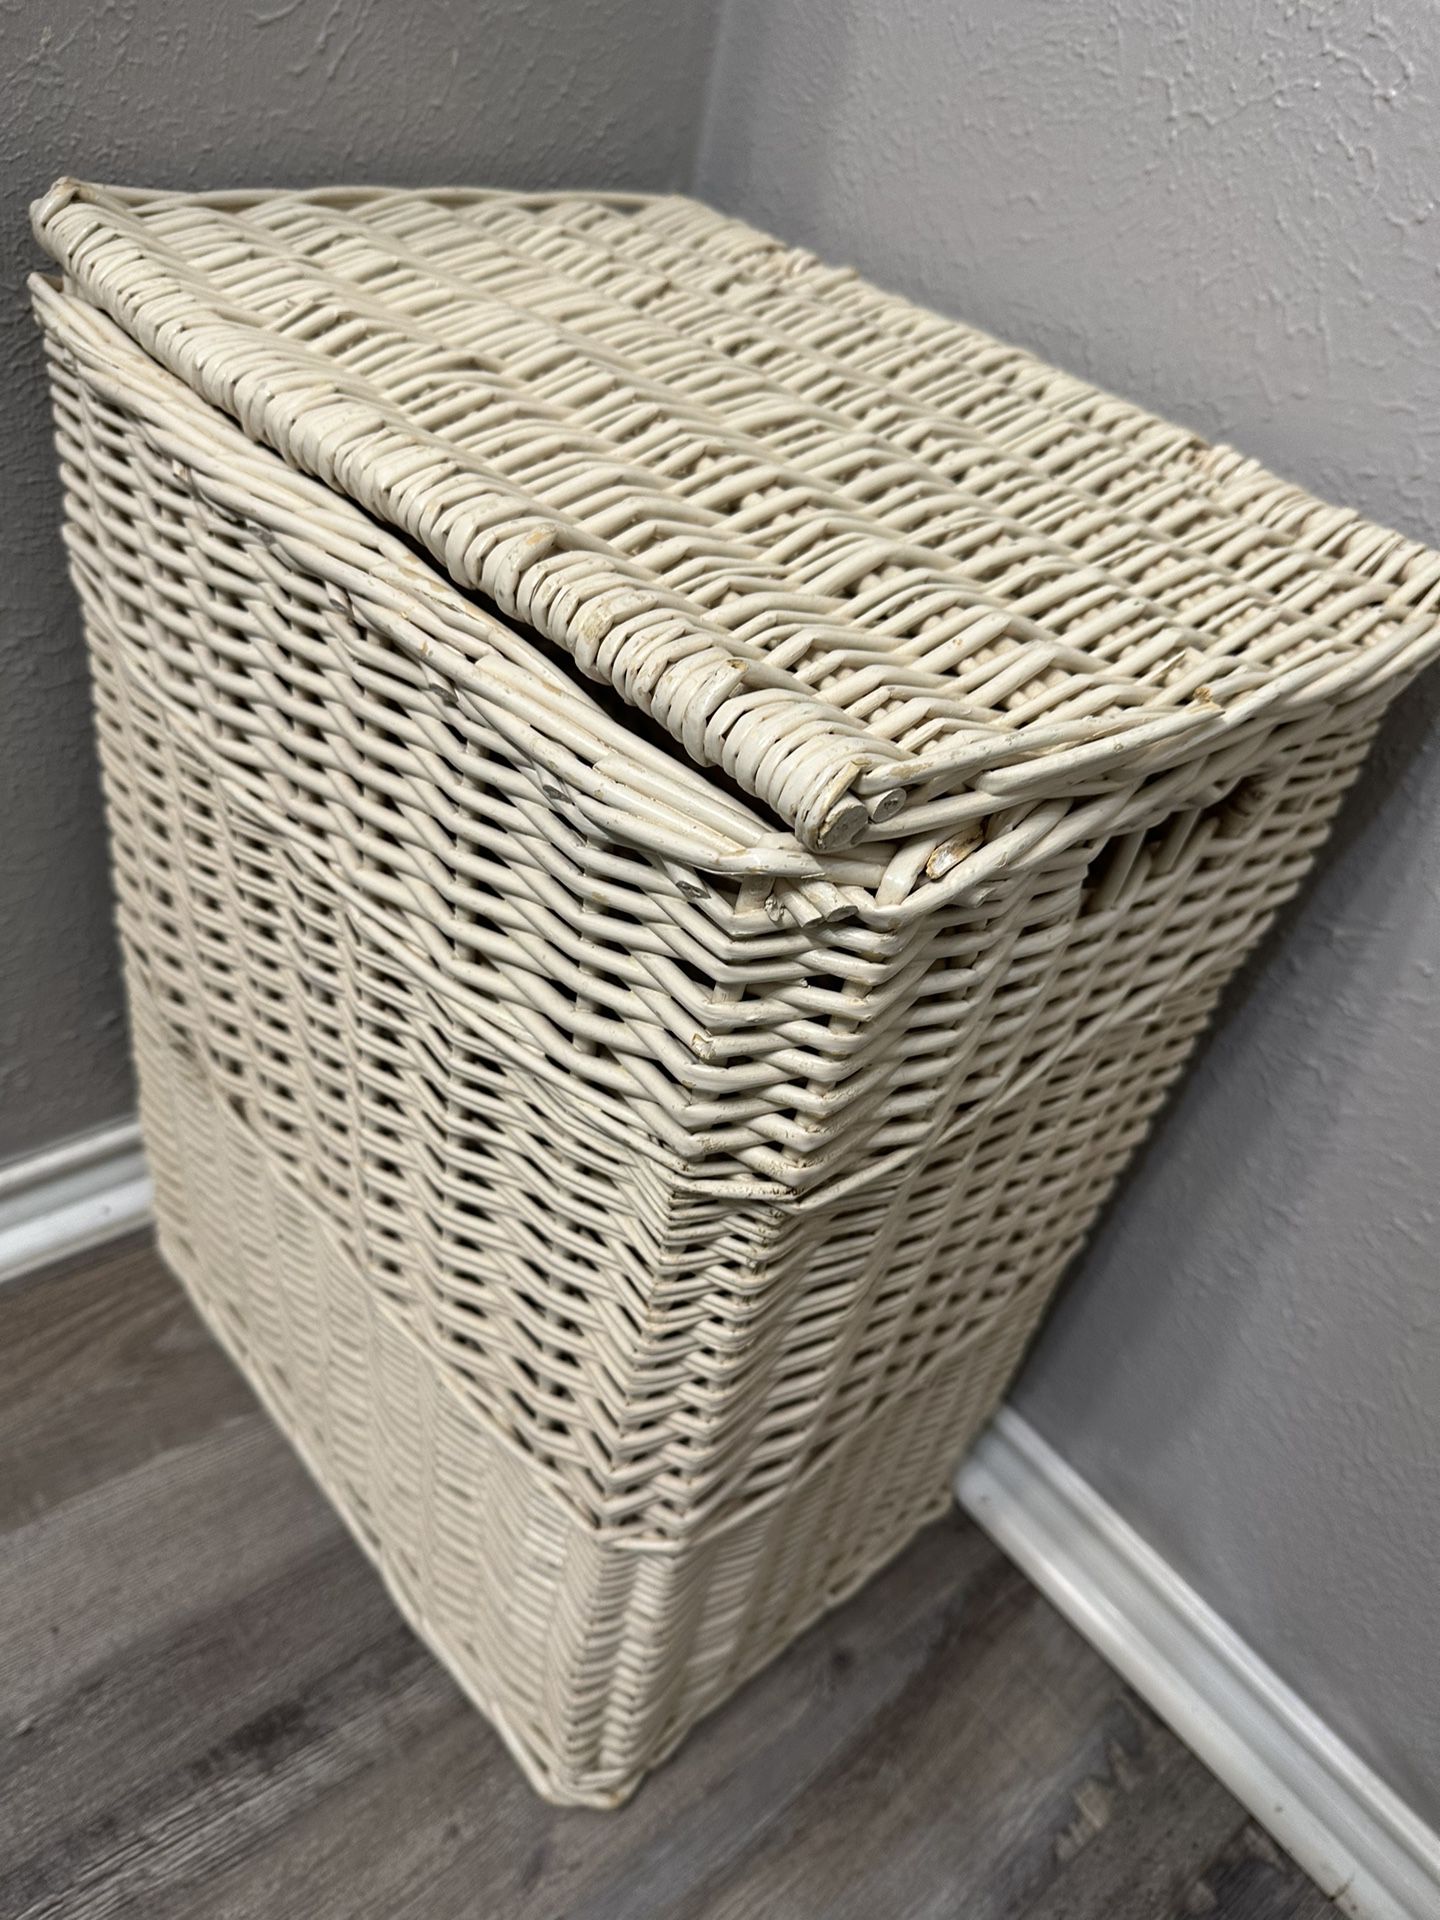 White Wicker Laundry Basket - Stylish and Functional Storage Solution